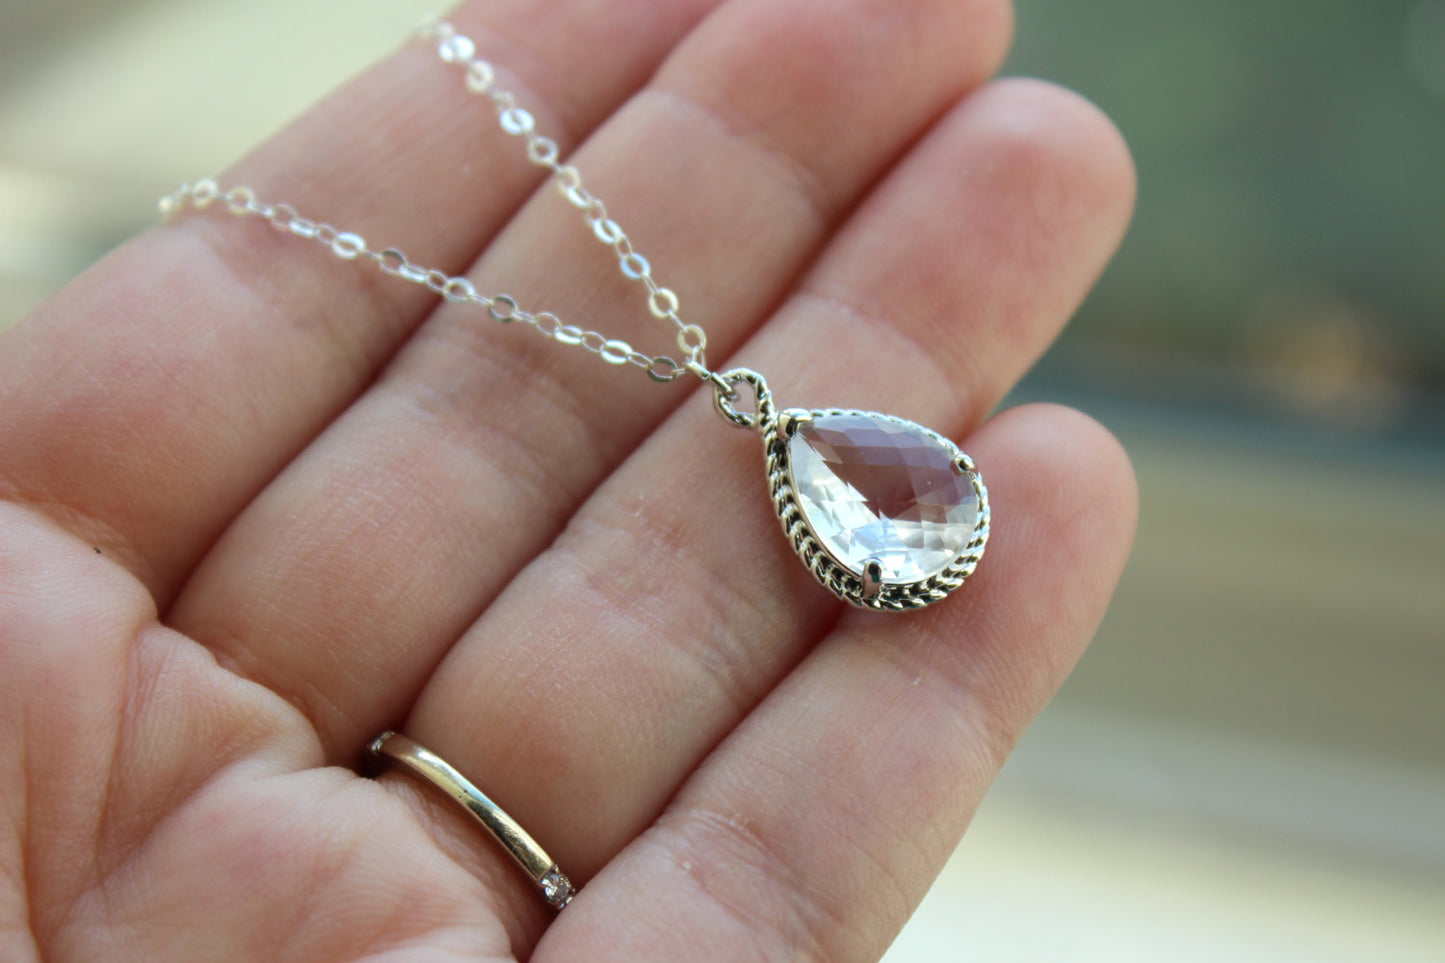 Silver Crystal Necklace Clear Jewelry - Sterling Silver Chain - Wedding Necklace Jewelry Bridesmaid Gift Jewelry - Crystal Bridal Jewelry